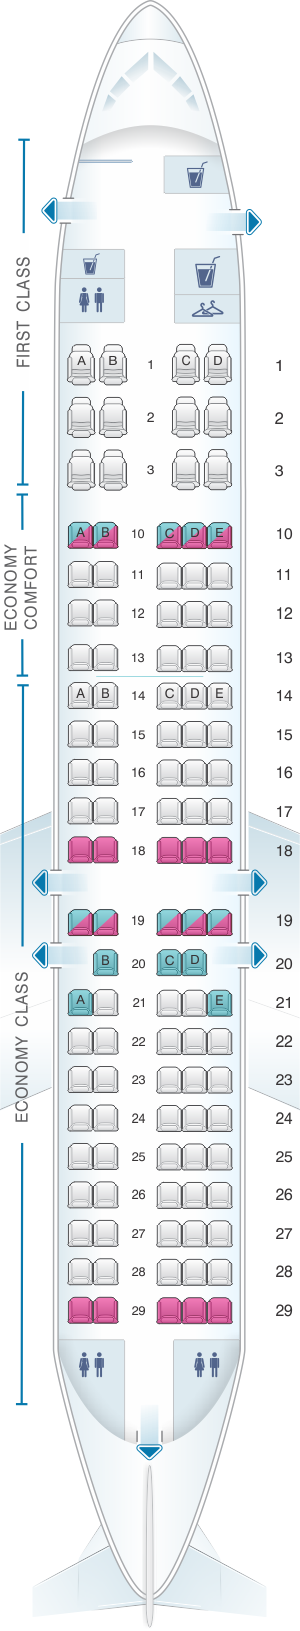 delta seat assignment after check in